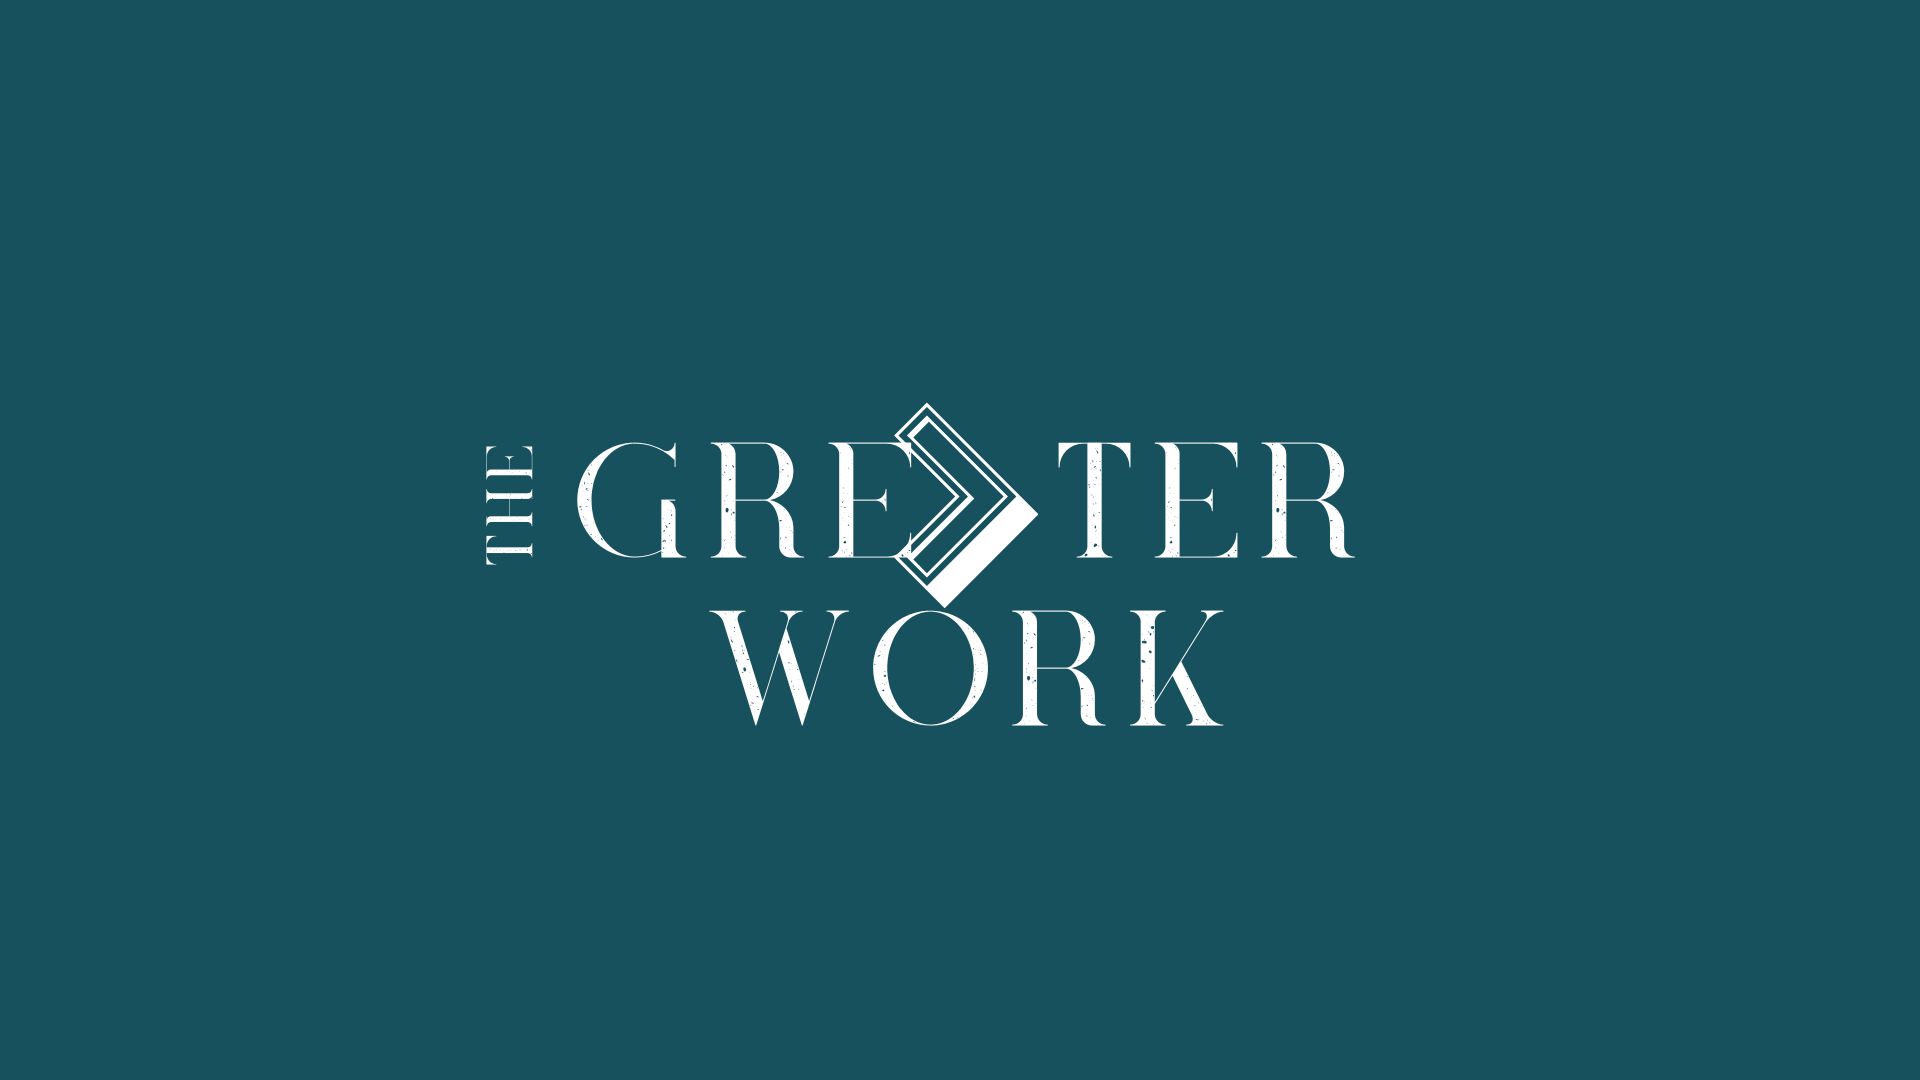 The Work of Intercession - The Greater Work Sermon Series